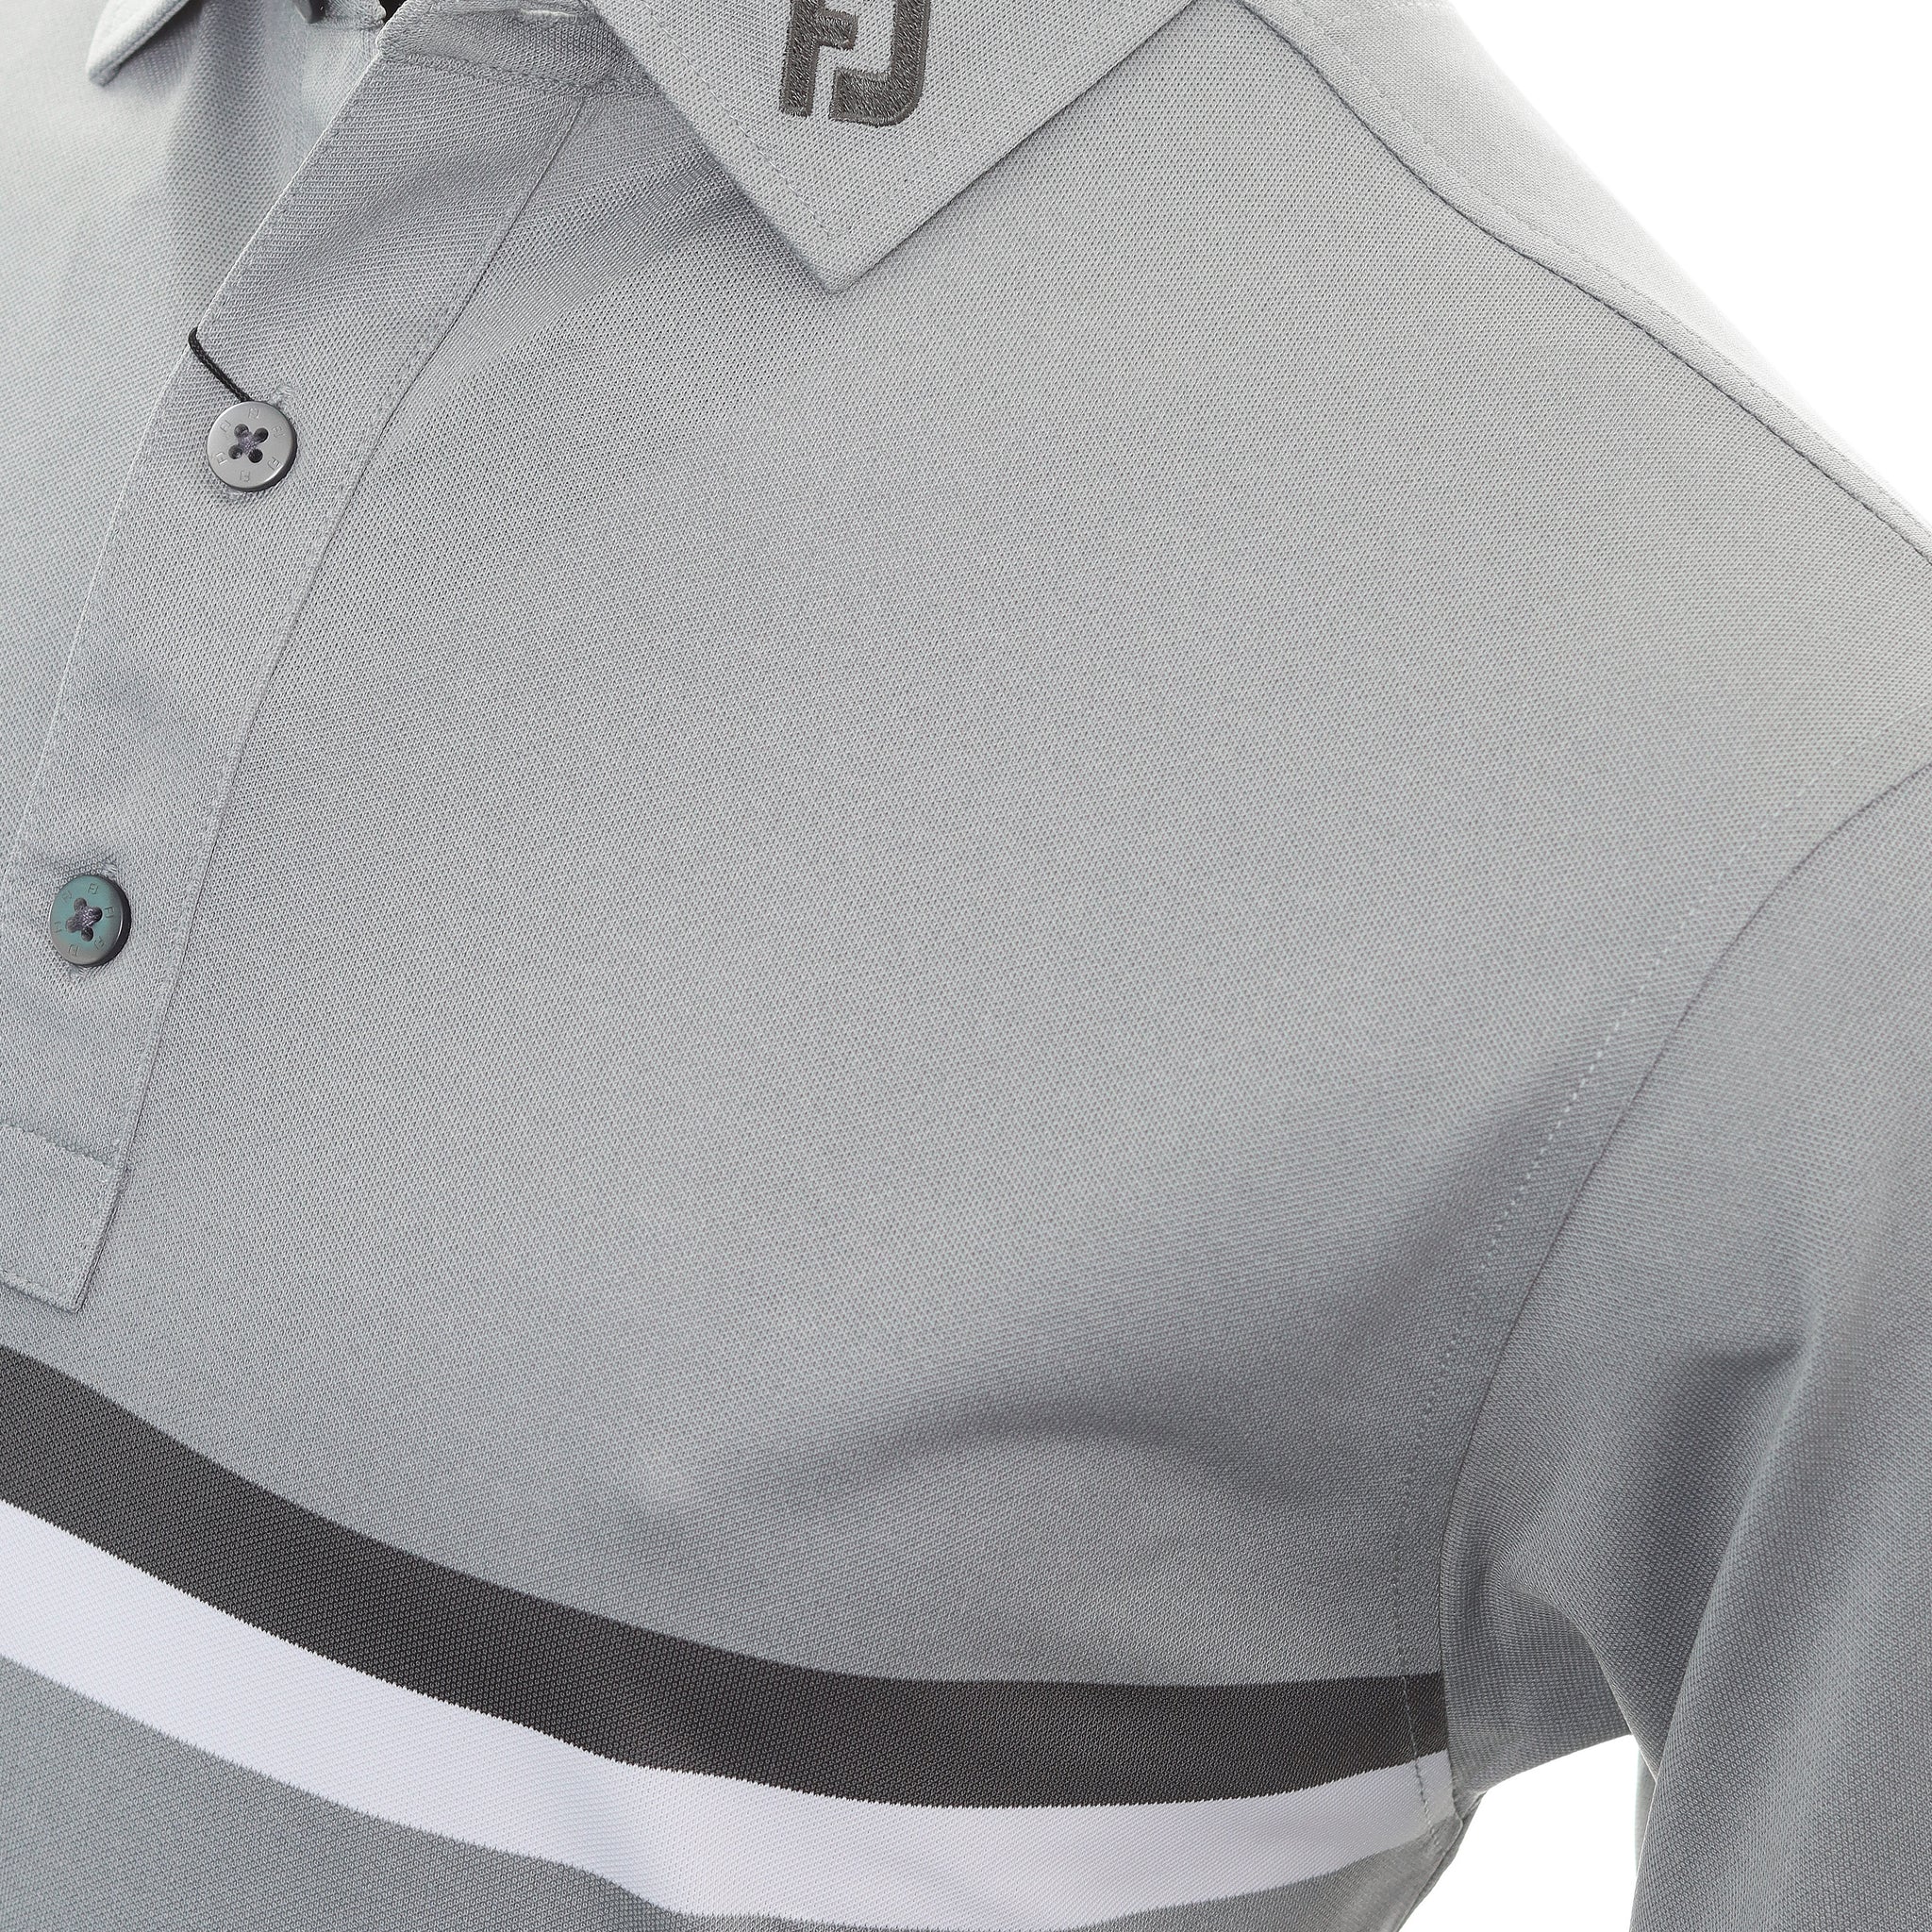 footjoy-double-chest-band-pique-golf-shirt-88442-heather-grey-charcoal-white